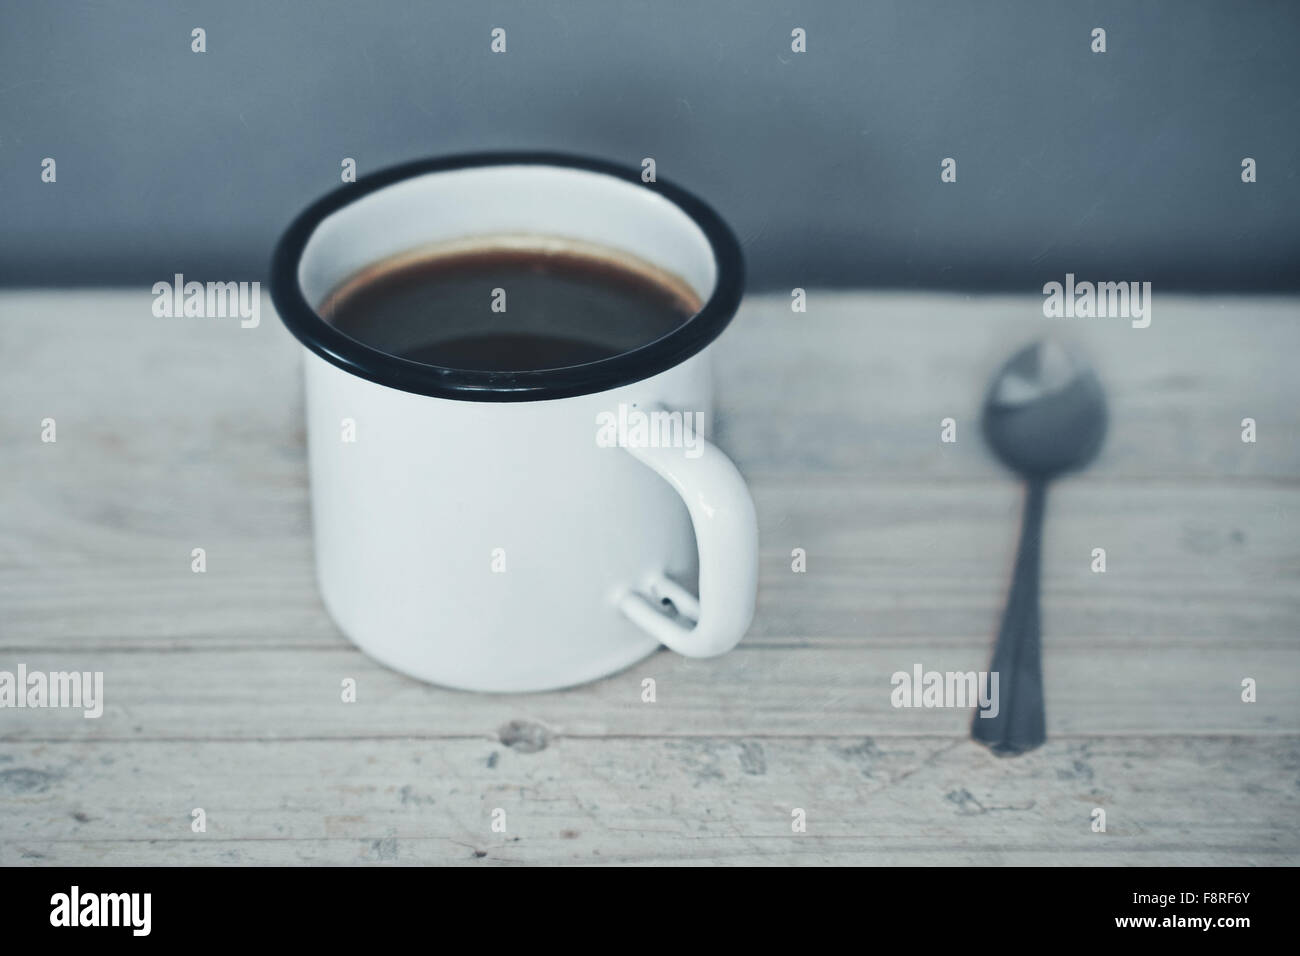 Mug of coffee and a spoon on a table Stock Photo